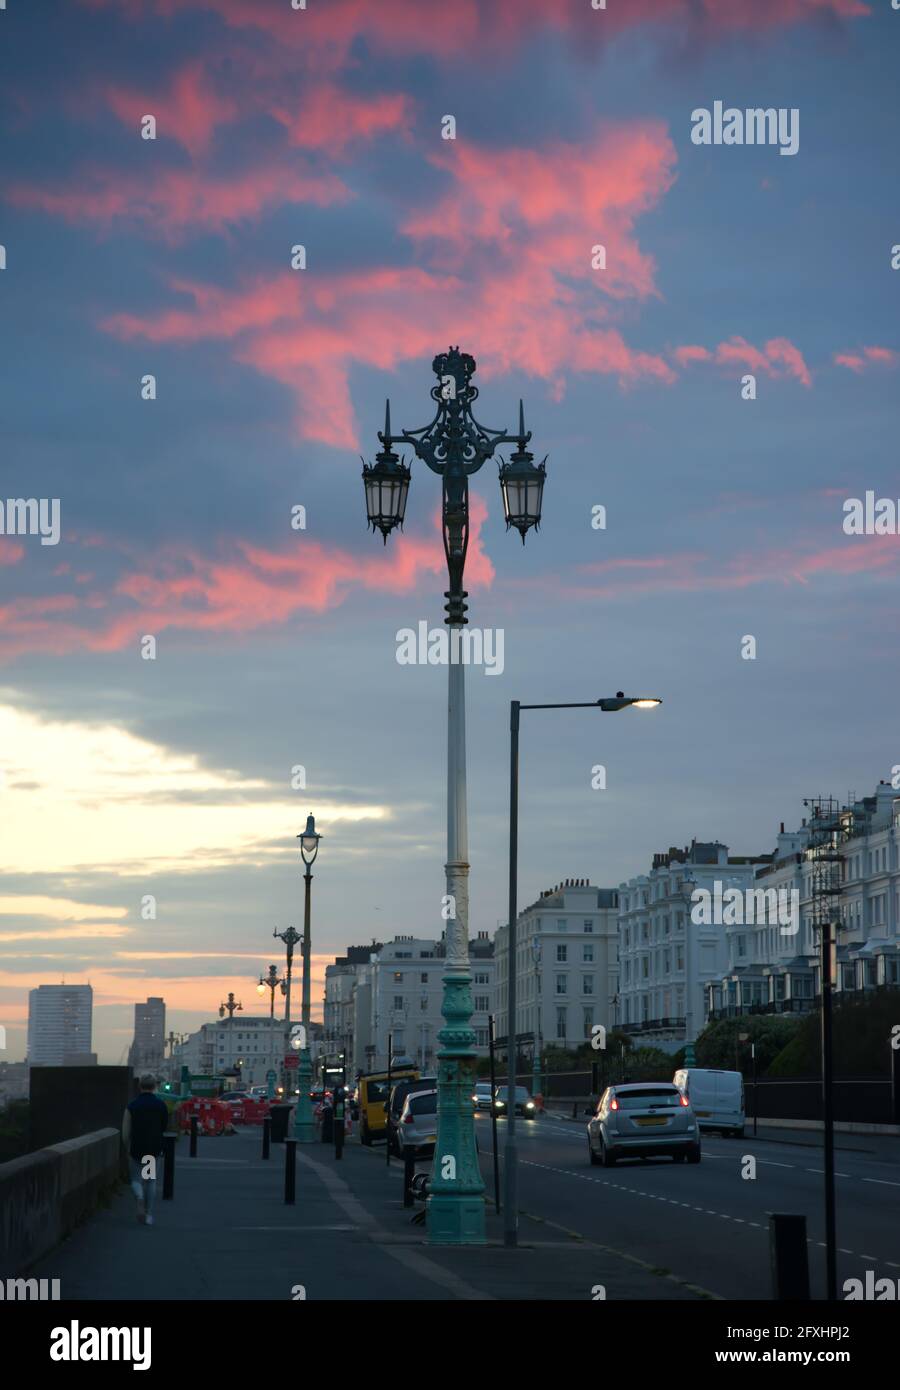 Brighton at sunset with pink sky Stock Photo